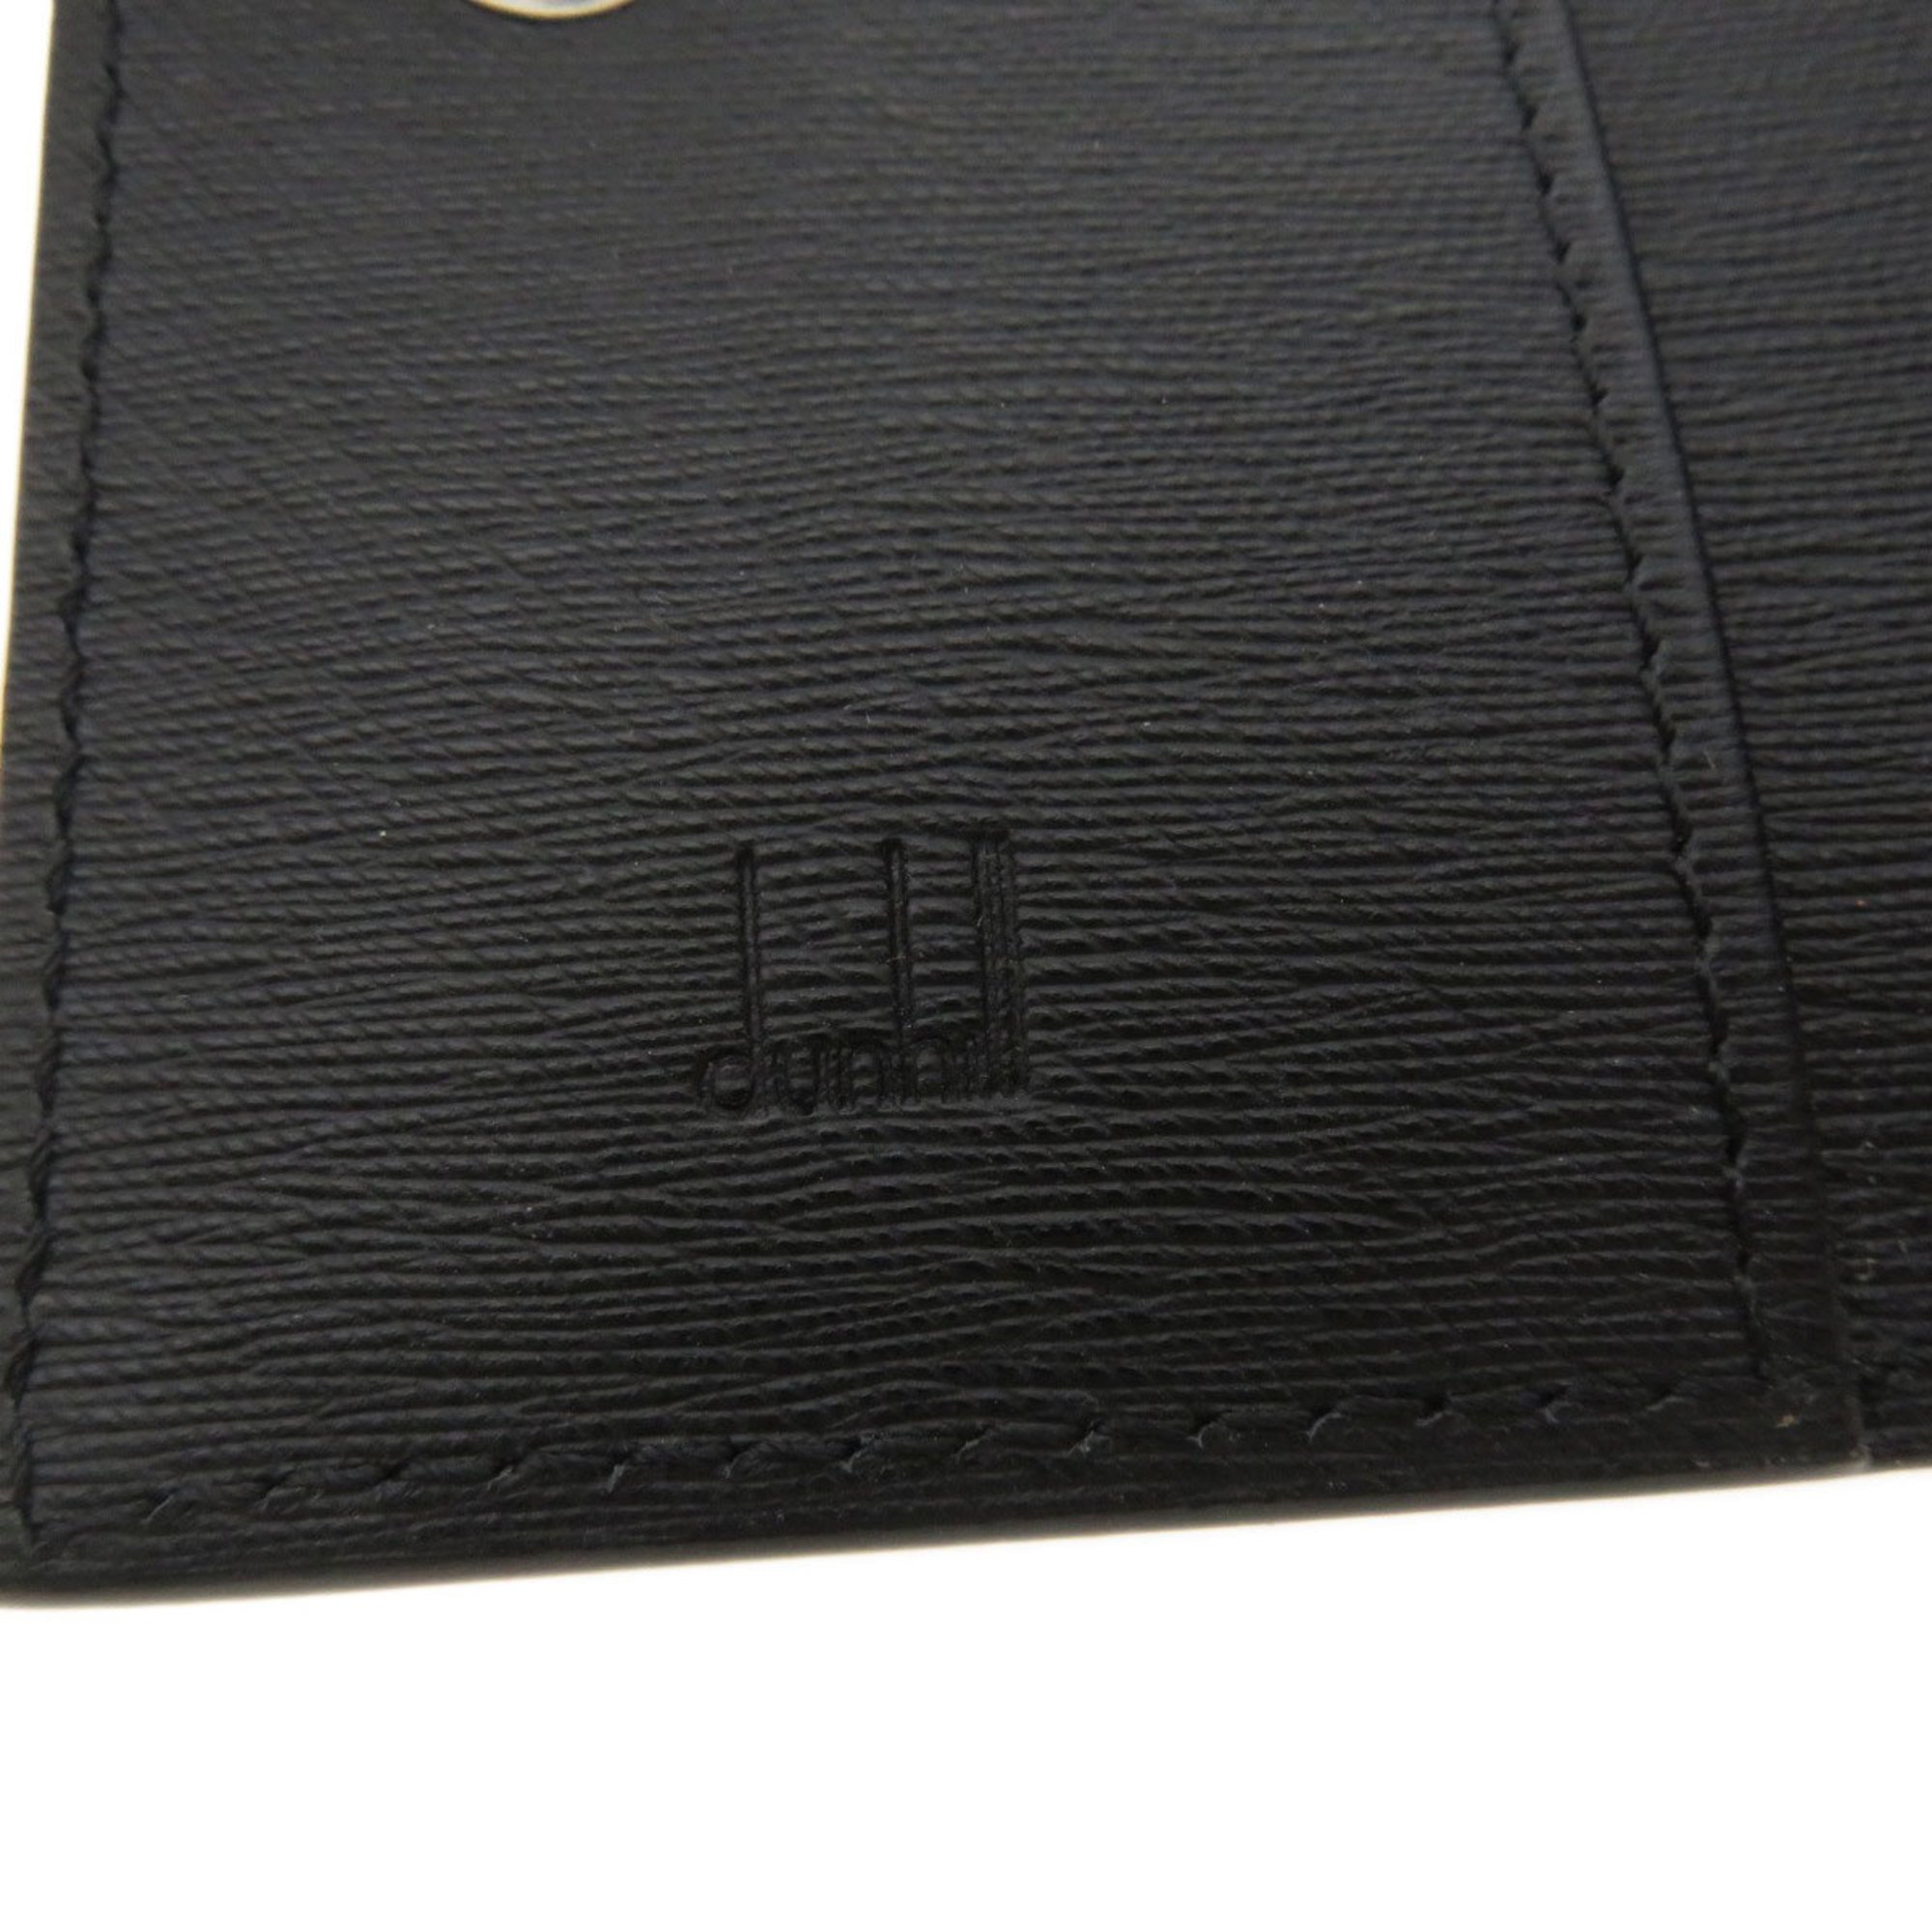 Dunhill hardware key case calf leather ladies